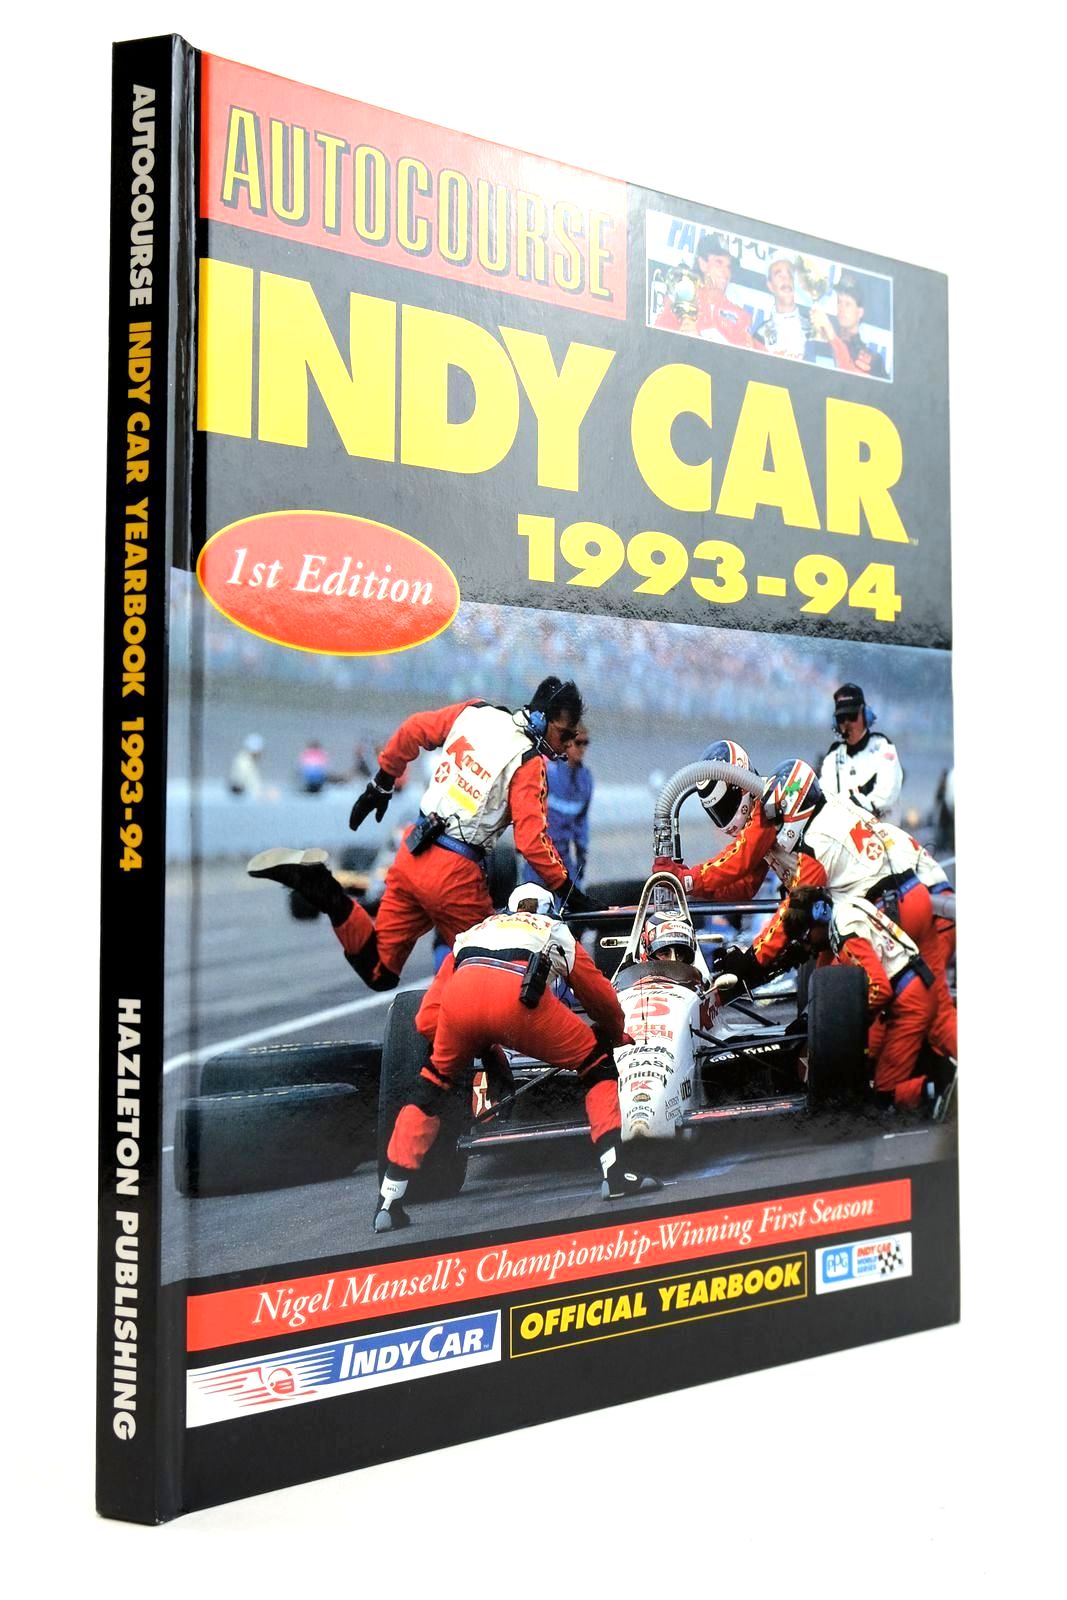 Photo of AUTOCOURSE INDY CAR 1993-94 published by Hazleton Publishing (STOCK CODE: 2132756)  for sale by Stella & Rose's Books